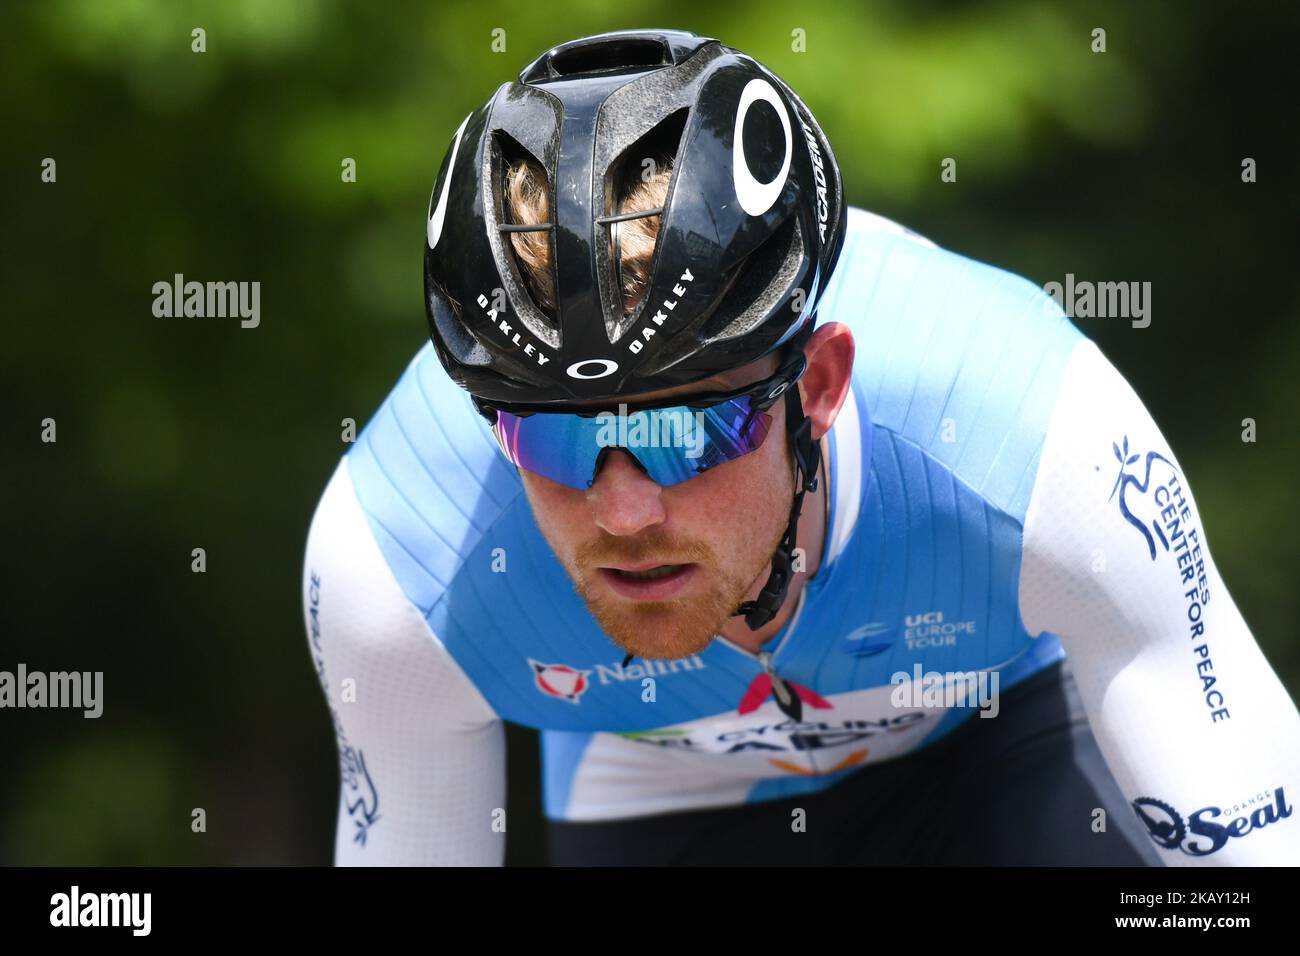 New Zealand rider Hamish Schreurs from team Israel Cycling Academy in action during the opening stage, 2.6km Individual Time Trial in Daisen Park, Sakai. On Sunday, May 20, 2018, in Sakai, Osaka Prefecture, Japan. (Photo by Artur Widak/NurPhoto)  Stock Photo